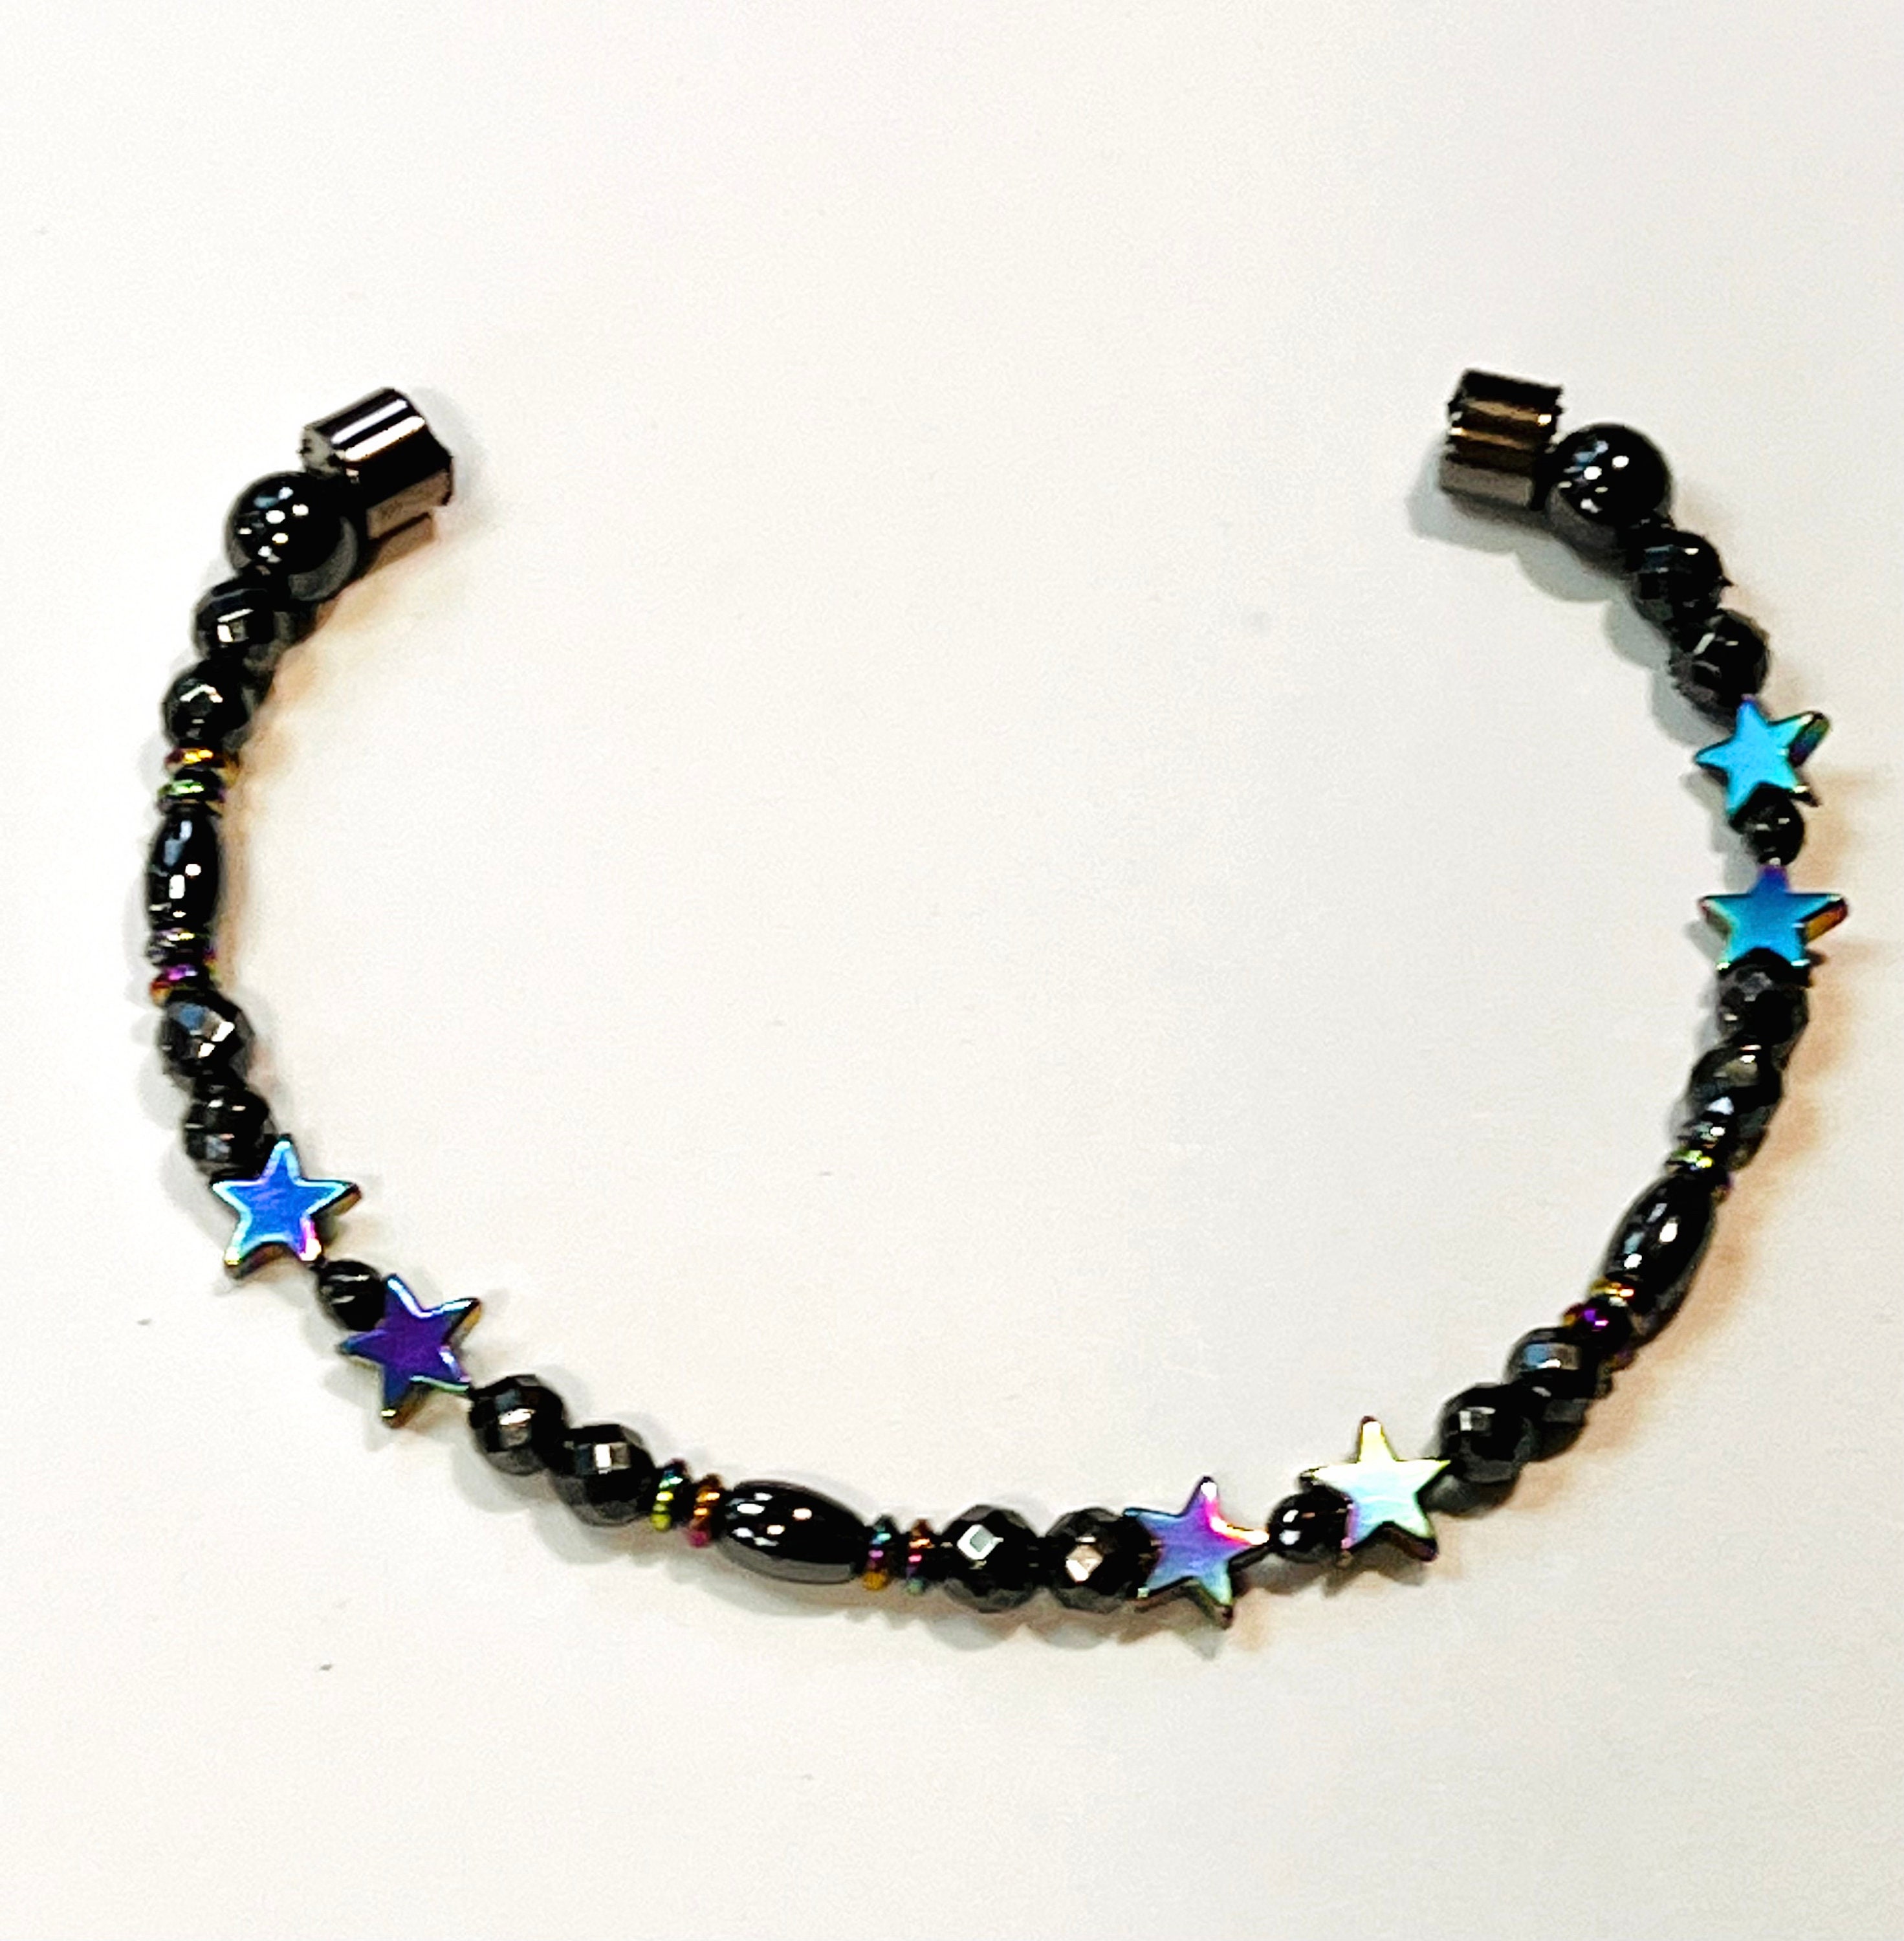 Magnetic Healing Therapy Arthritis Anklet Hematite Weight Loss Ankle  Bracelet UK | eBay